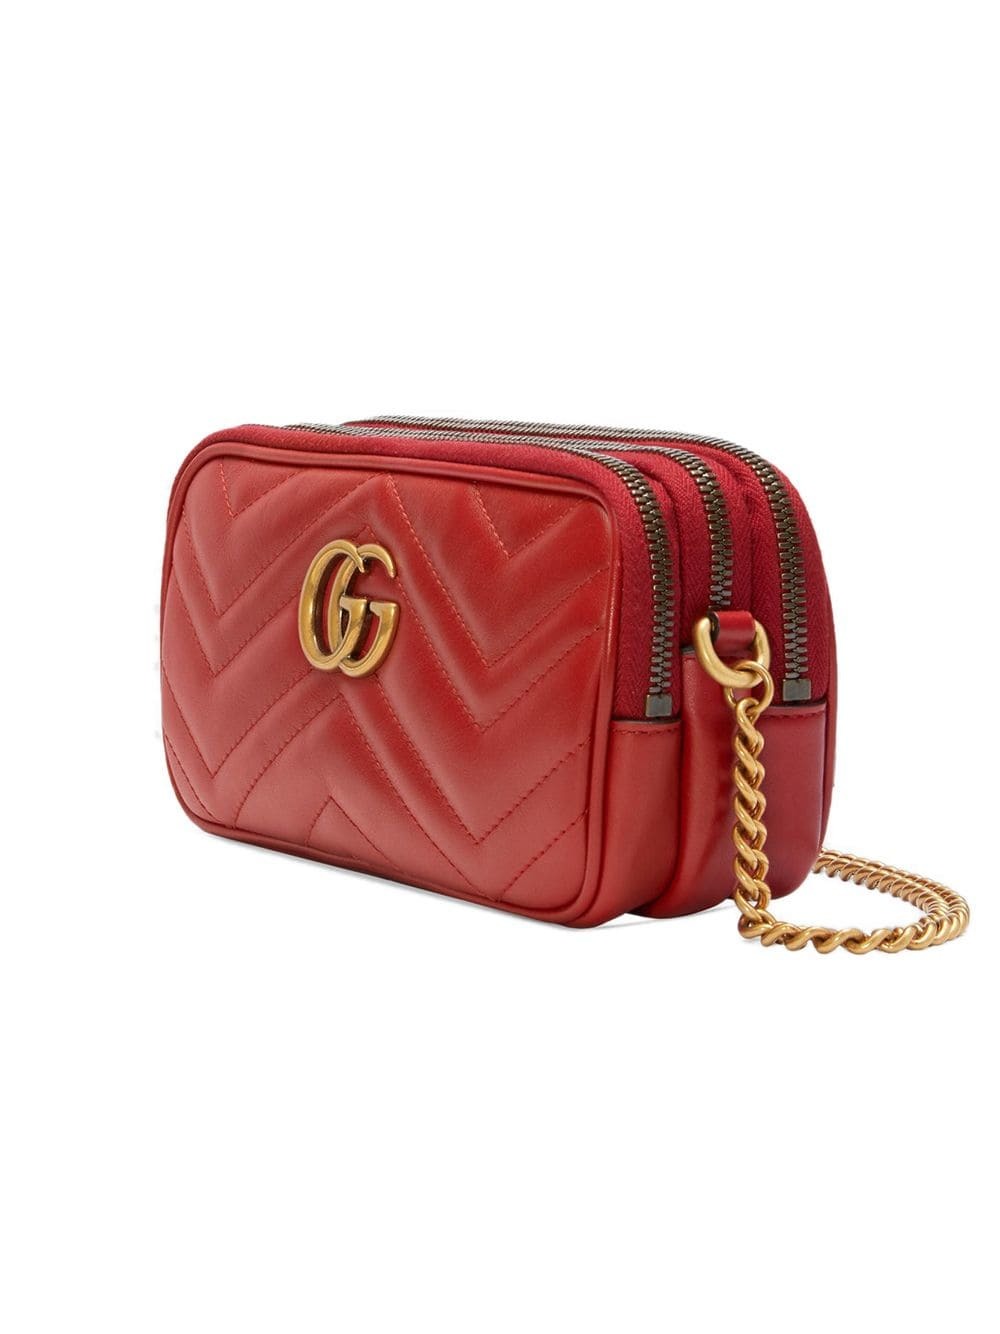 Gg marmont chain leather crossbody bag Gucci Red in Leather - 31787924